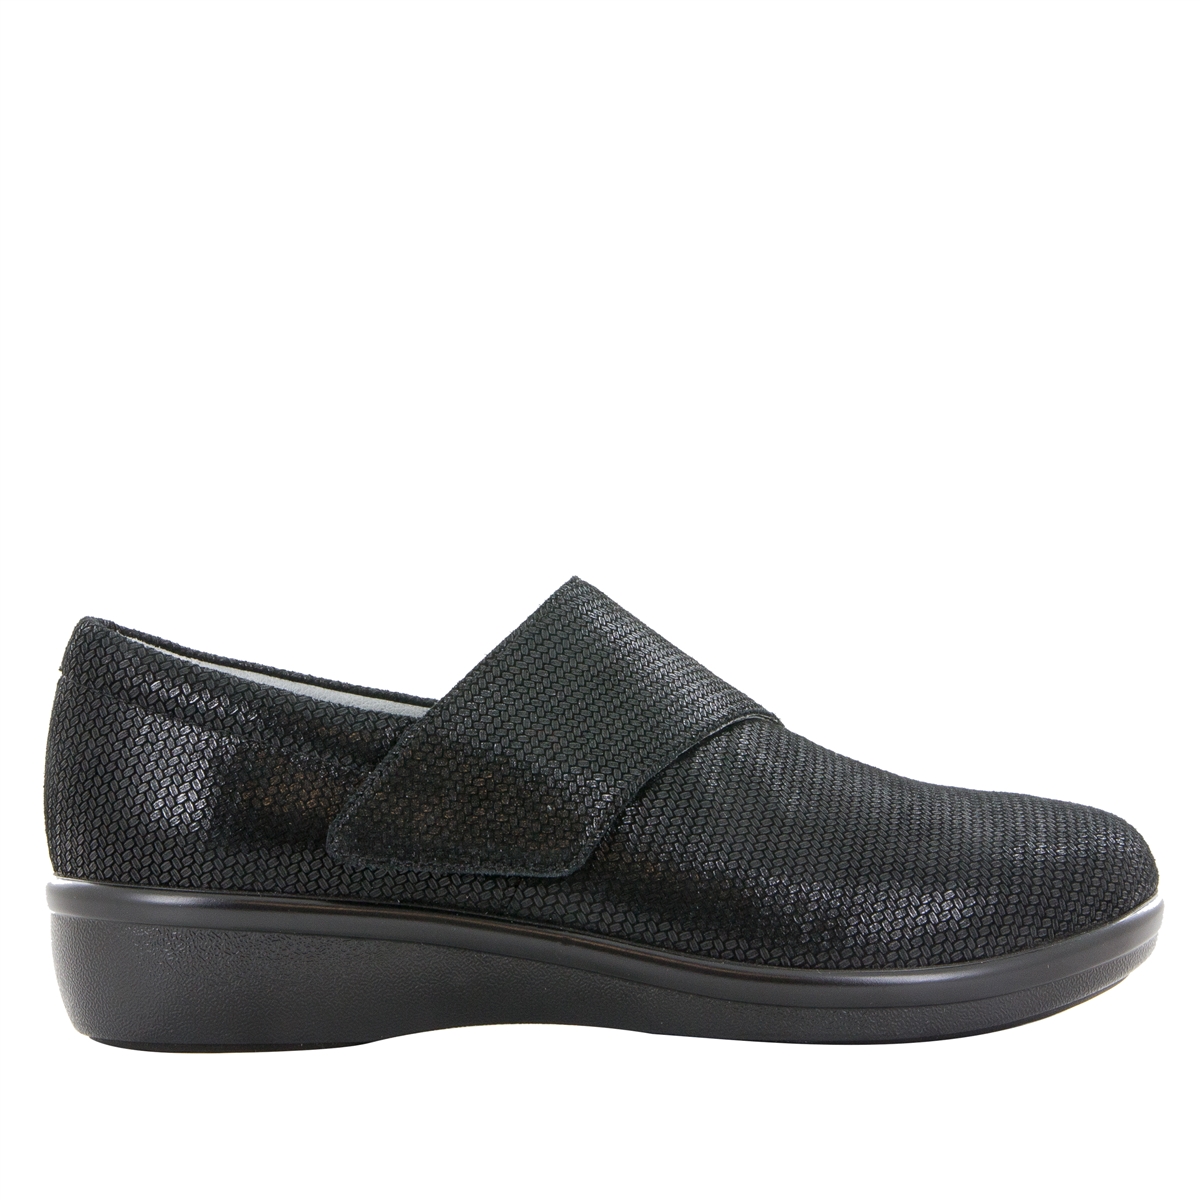 Alegria Alegria Qin TRAQ Bob And Weave Shiny Black Suede Leather Upper Comfort Loafers 